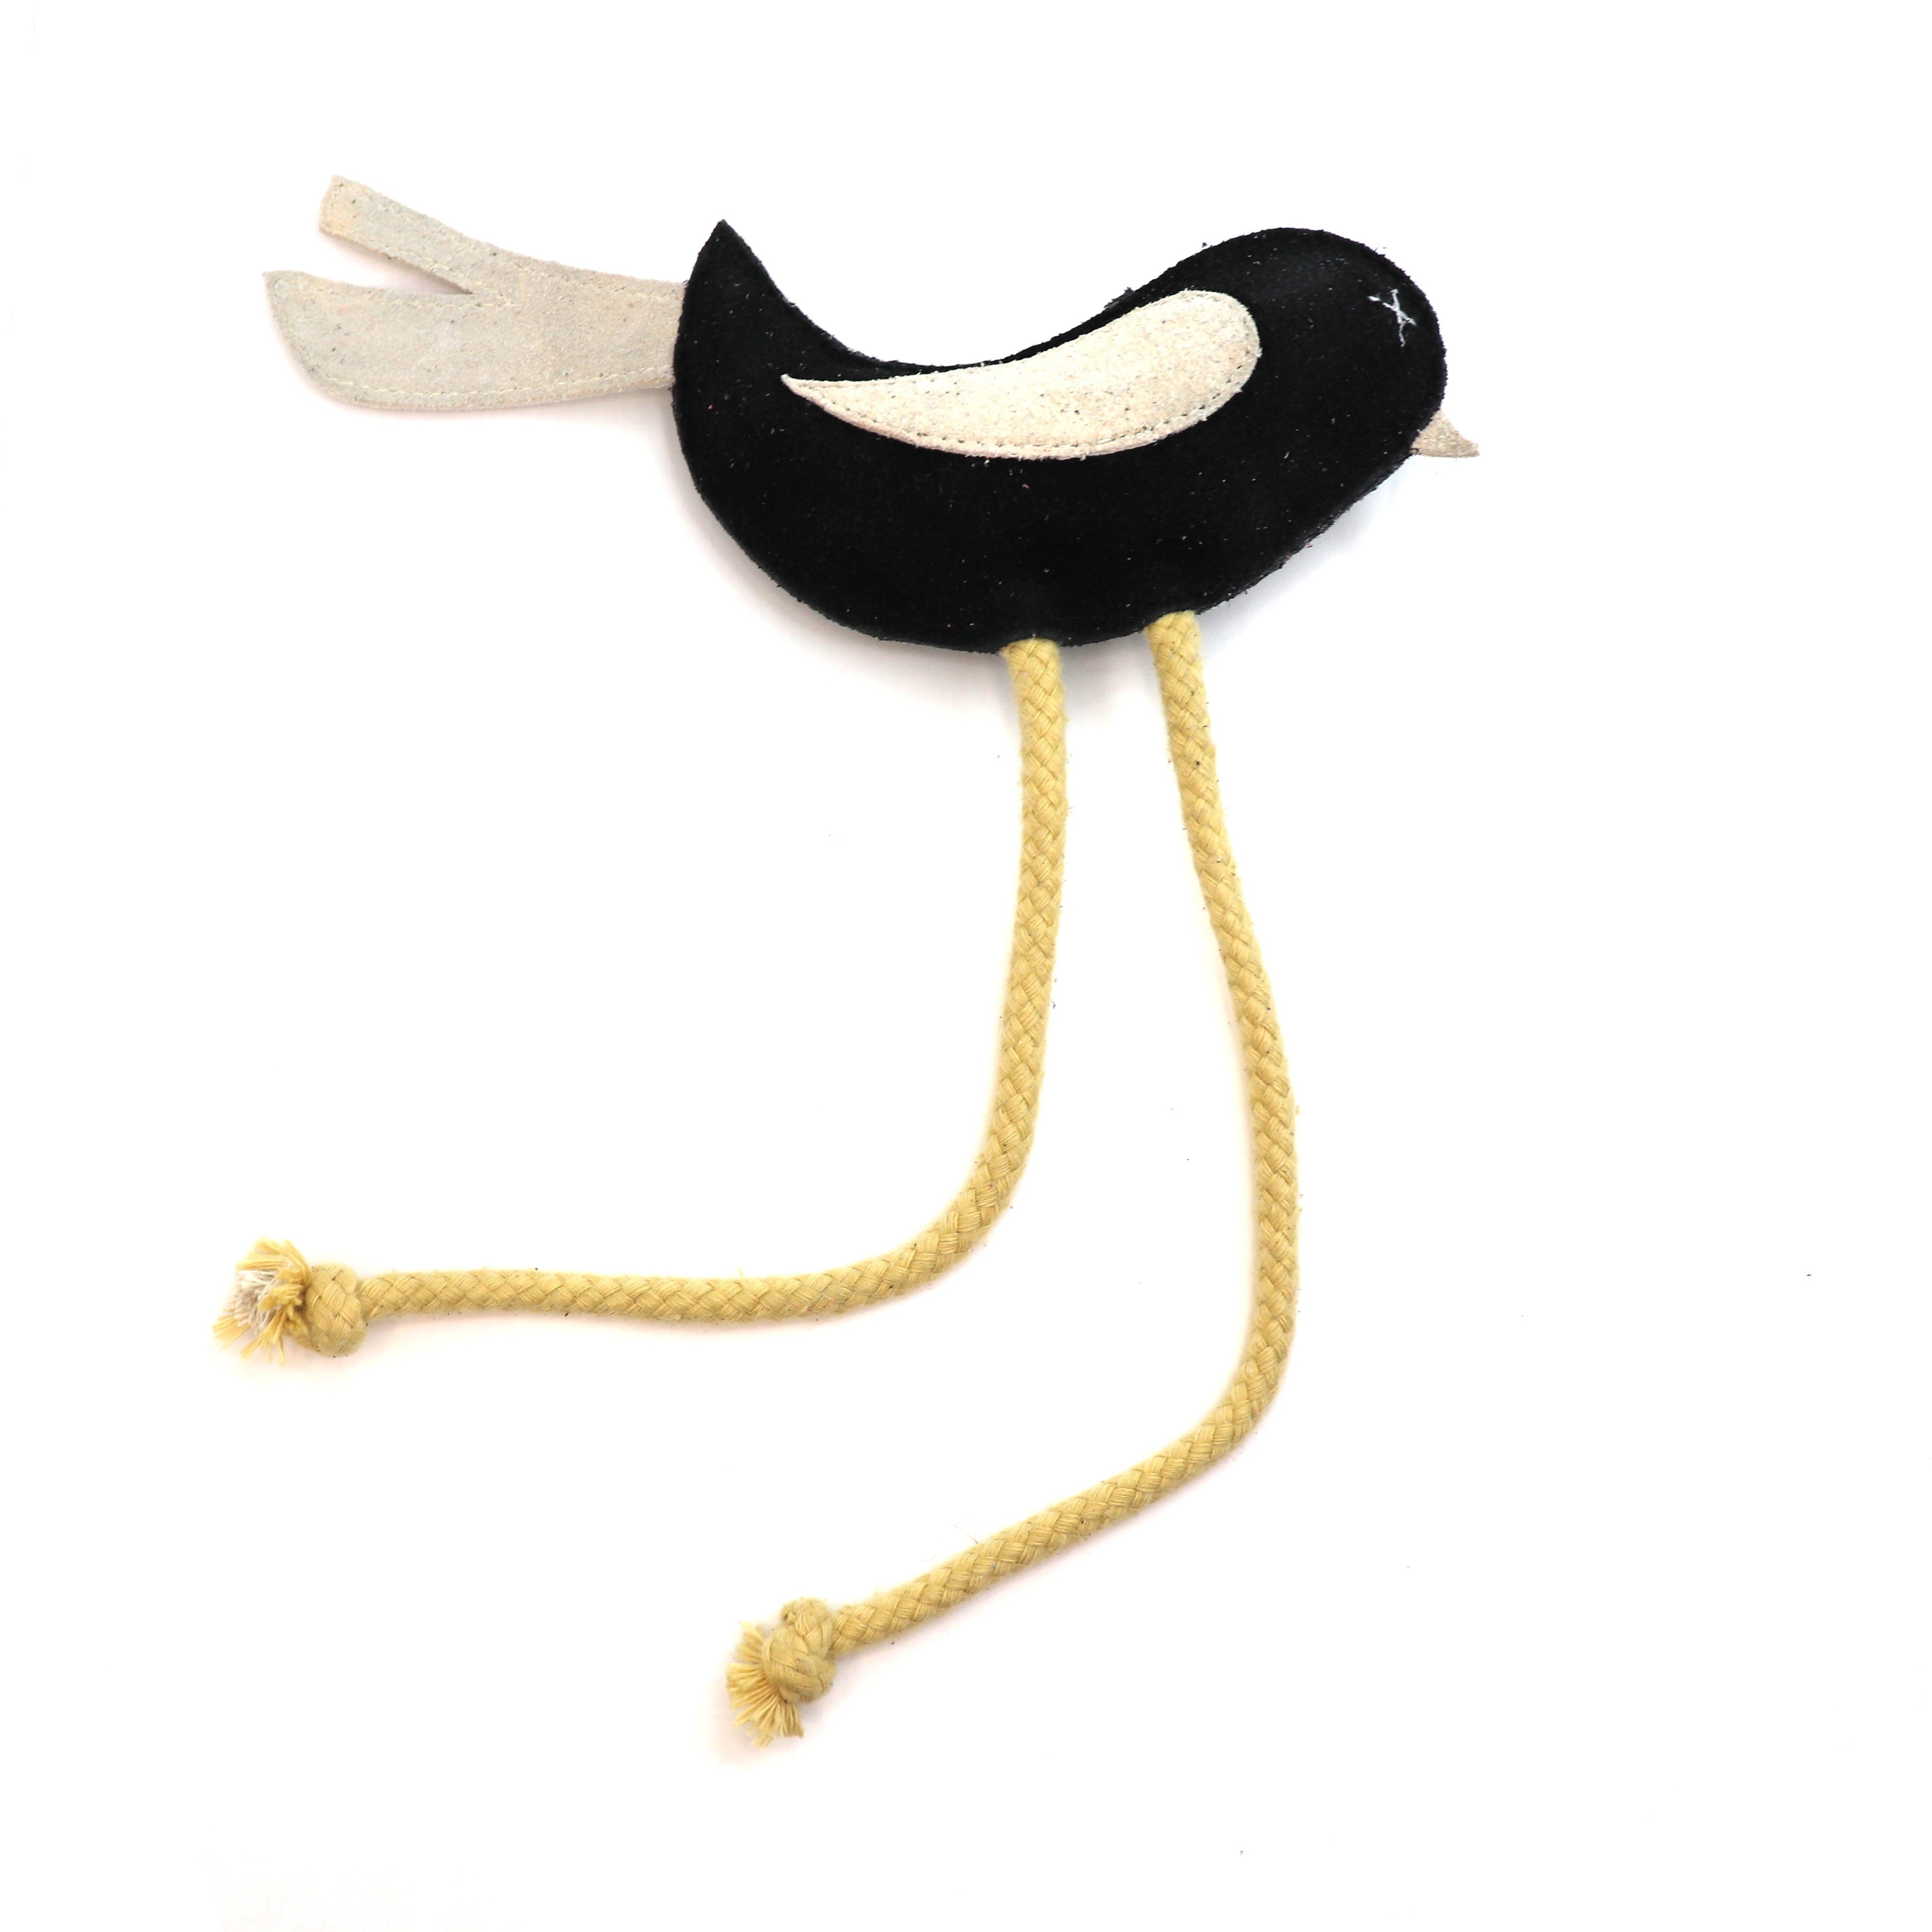 A whimsical Birdy Toy - black + chalk by Georgie Paws with long, yellow rope legs finished with knotted ends, isolated on a white background.